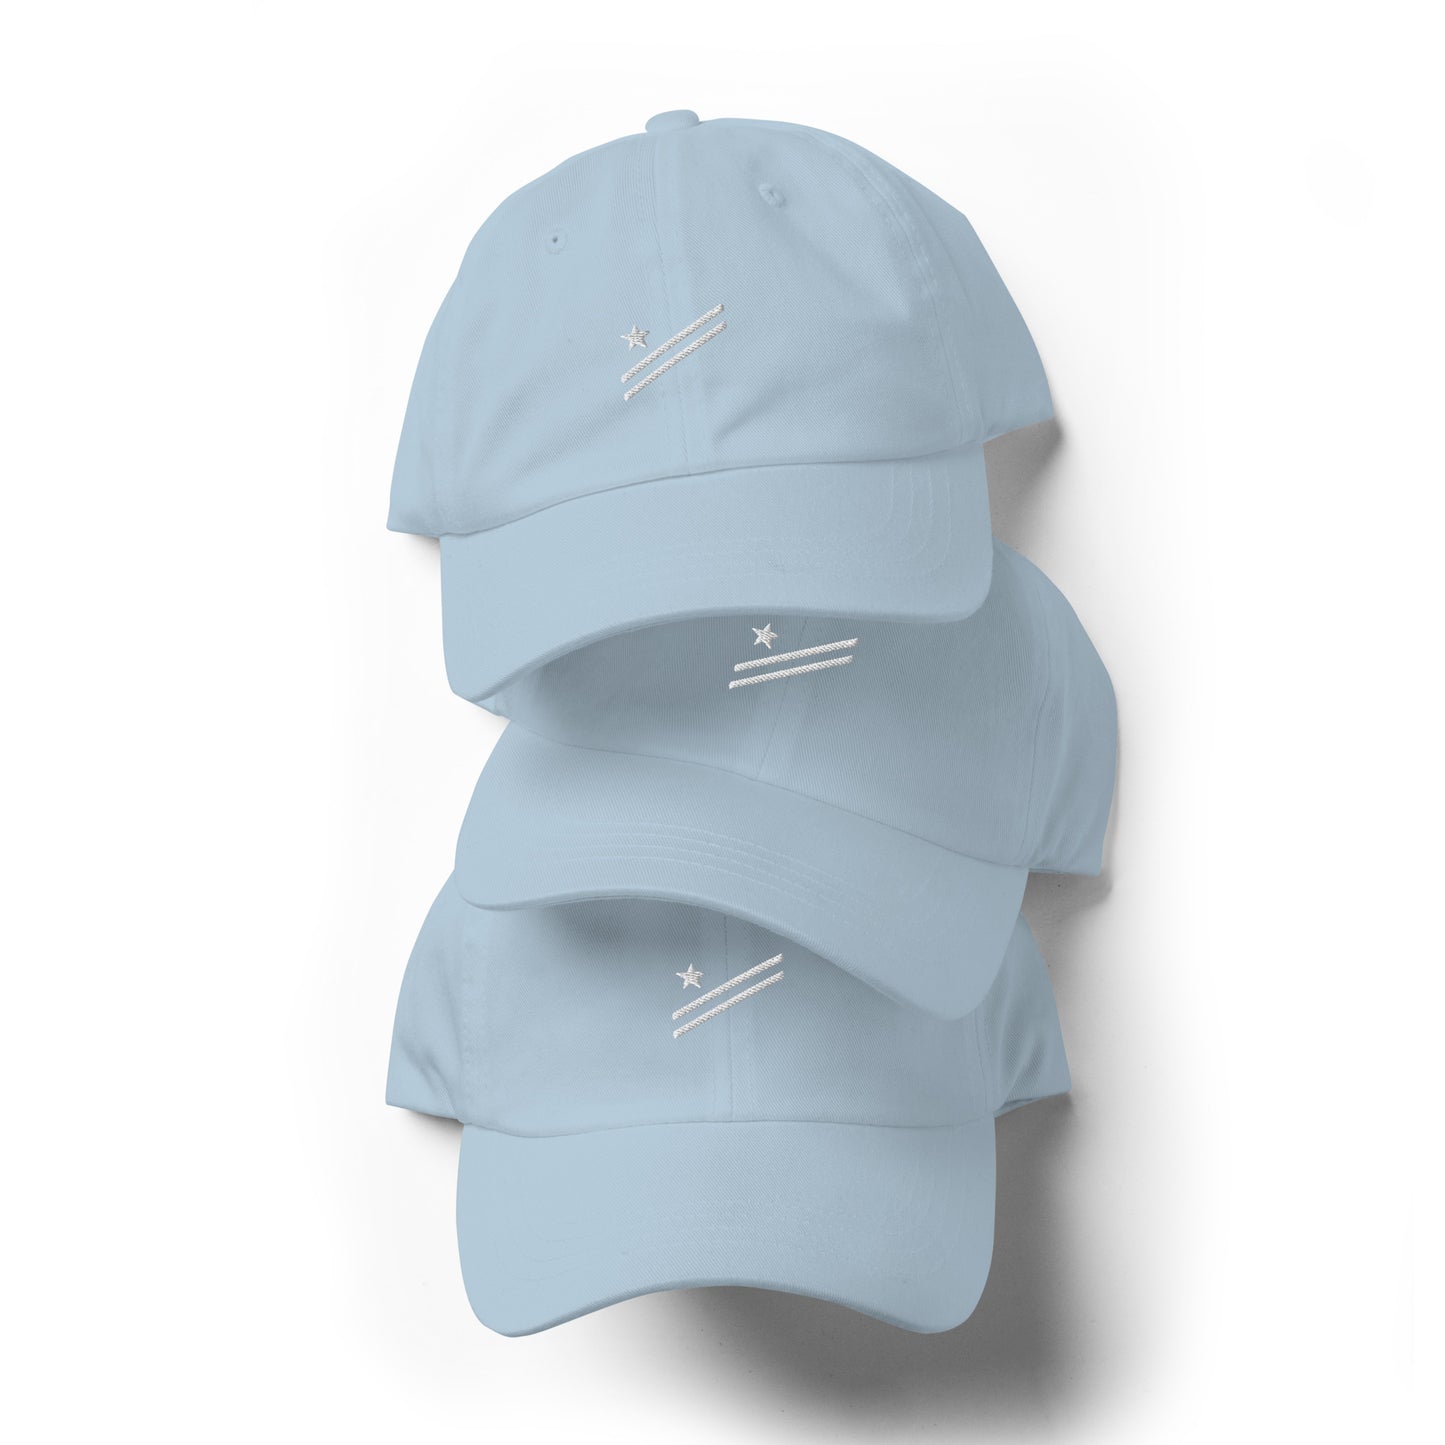 Martyrs - Classic Dad hat - WHITE FLAG broderie